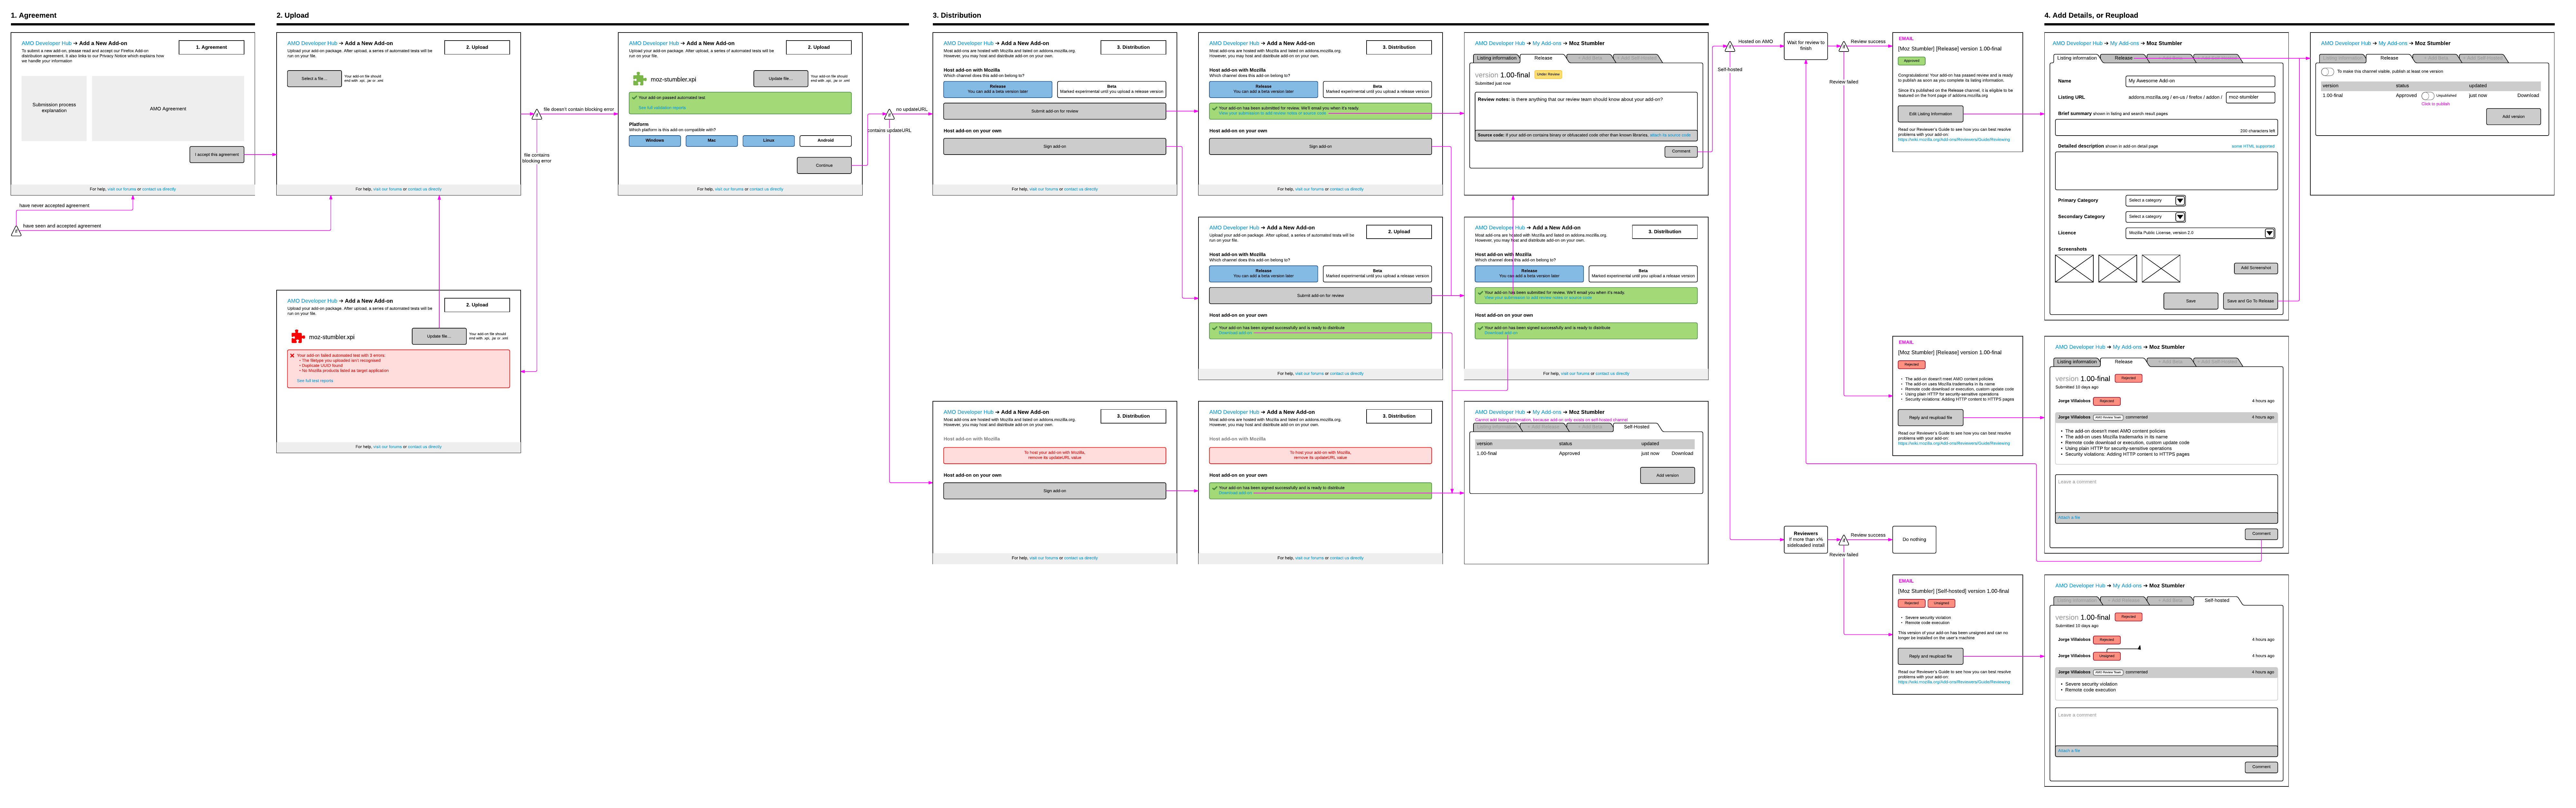 ../_images/ux-submission-wireframes.png